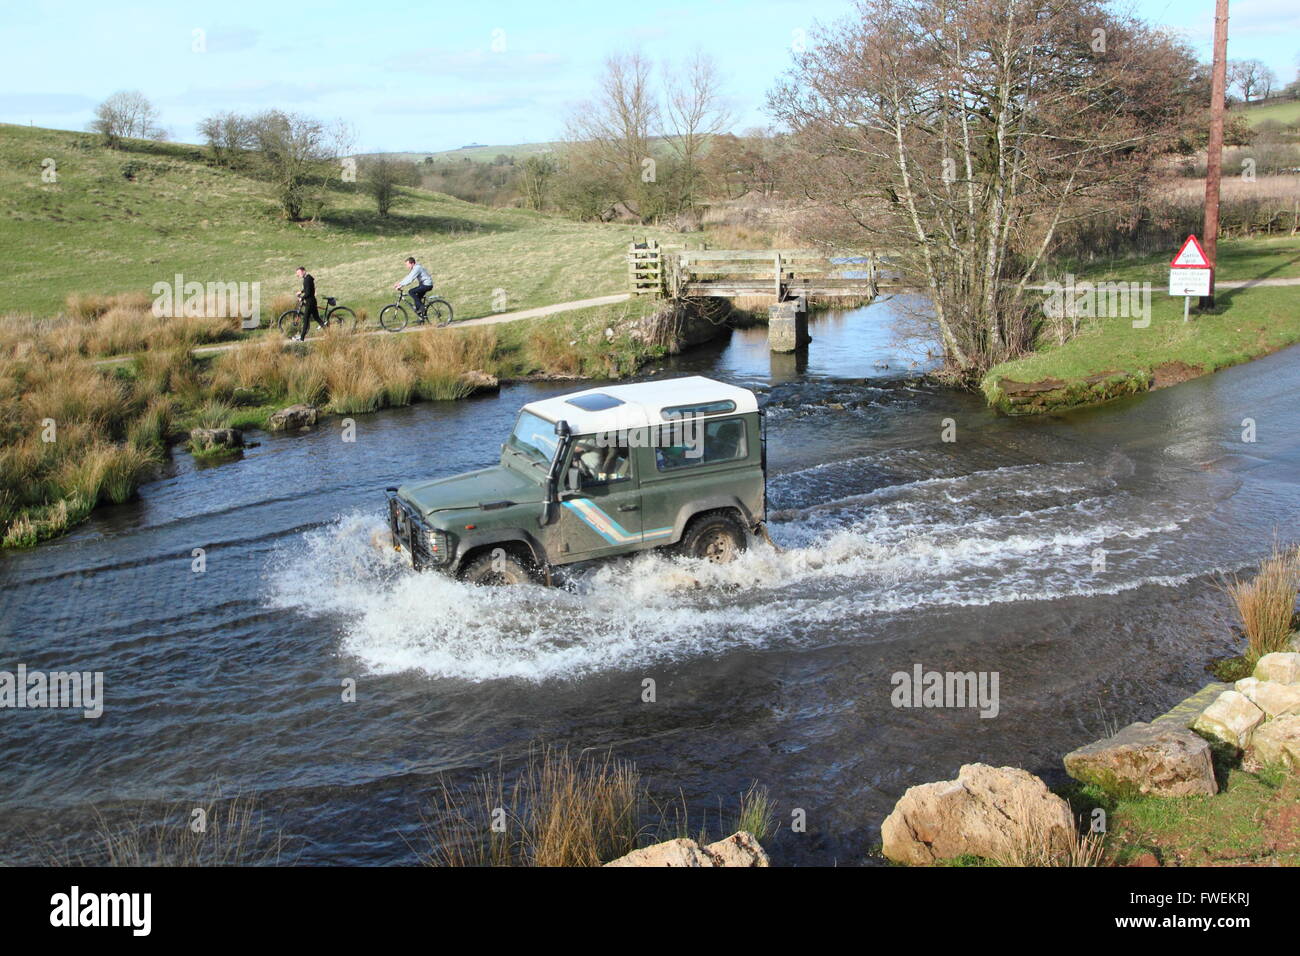 A 4x4 vehicle crosses the ford at Tissington in the Derbyshire Dales, England UK Stock Photo